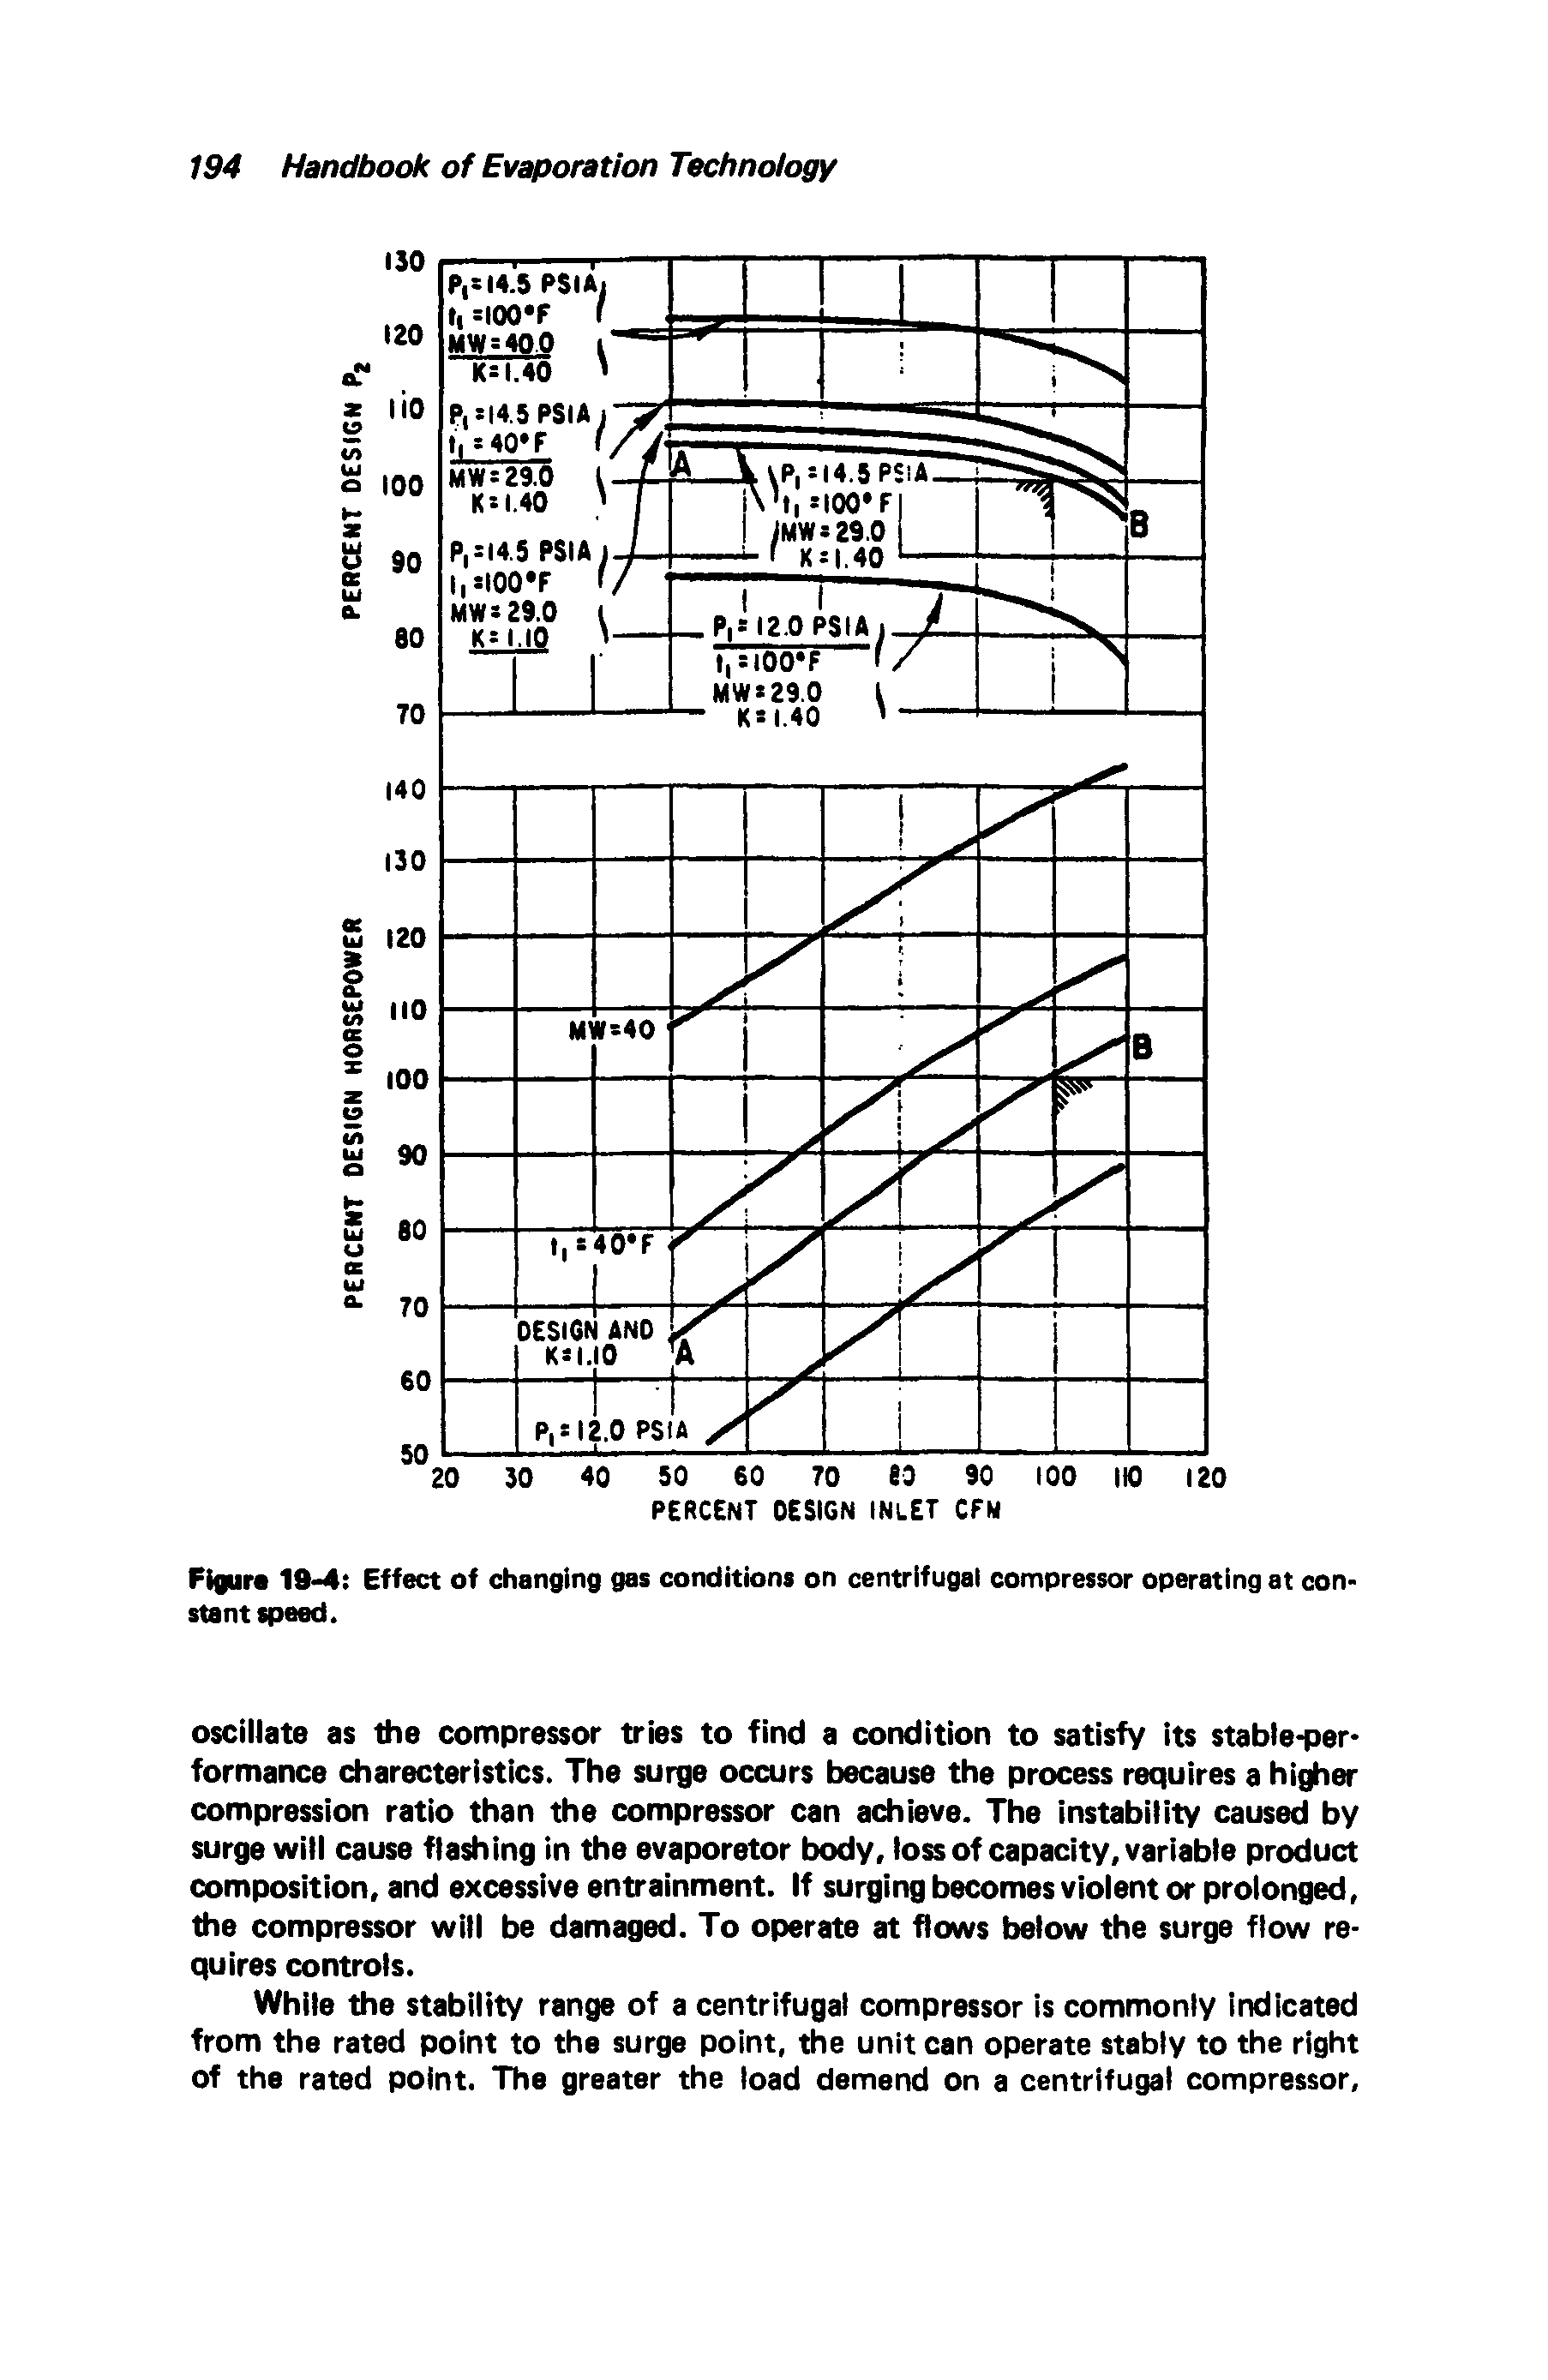 Figure 19-4 Effect of changing gat conditions on centrifugal compressor operating at constant speed.